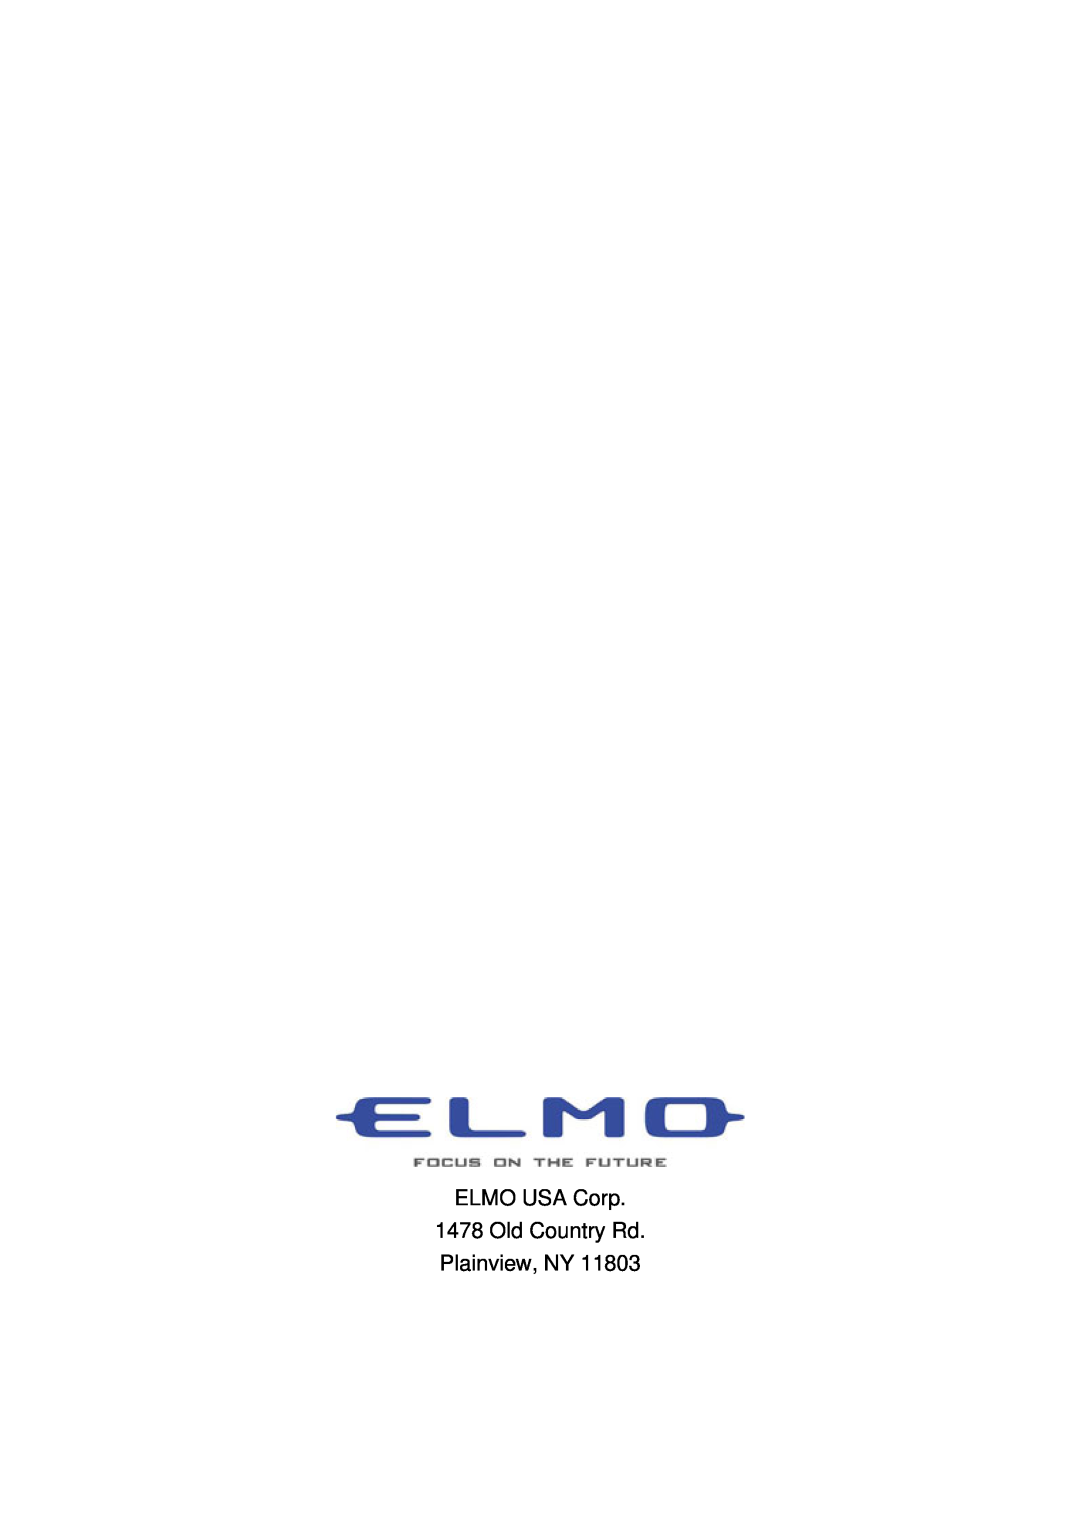 Elmo ESD-370 user manual ELMO USA Corp 1478 Old Country Rd Plainview, NY 